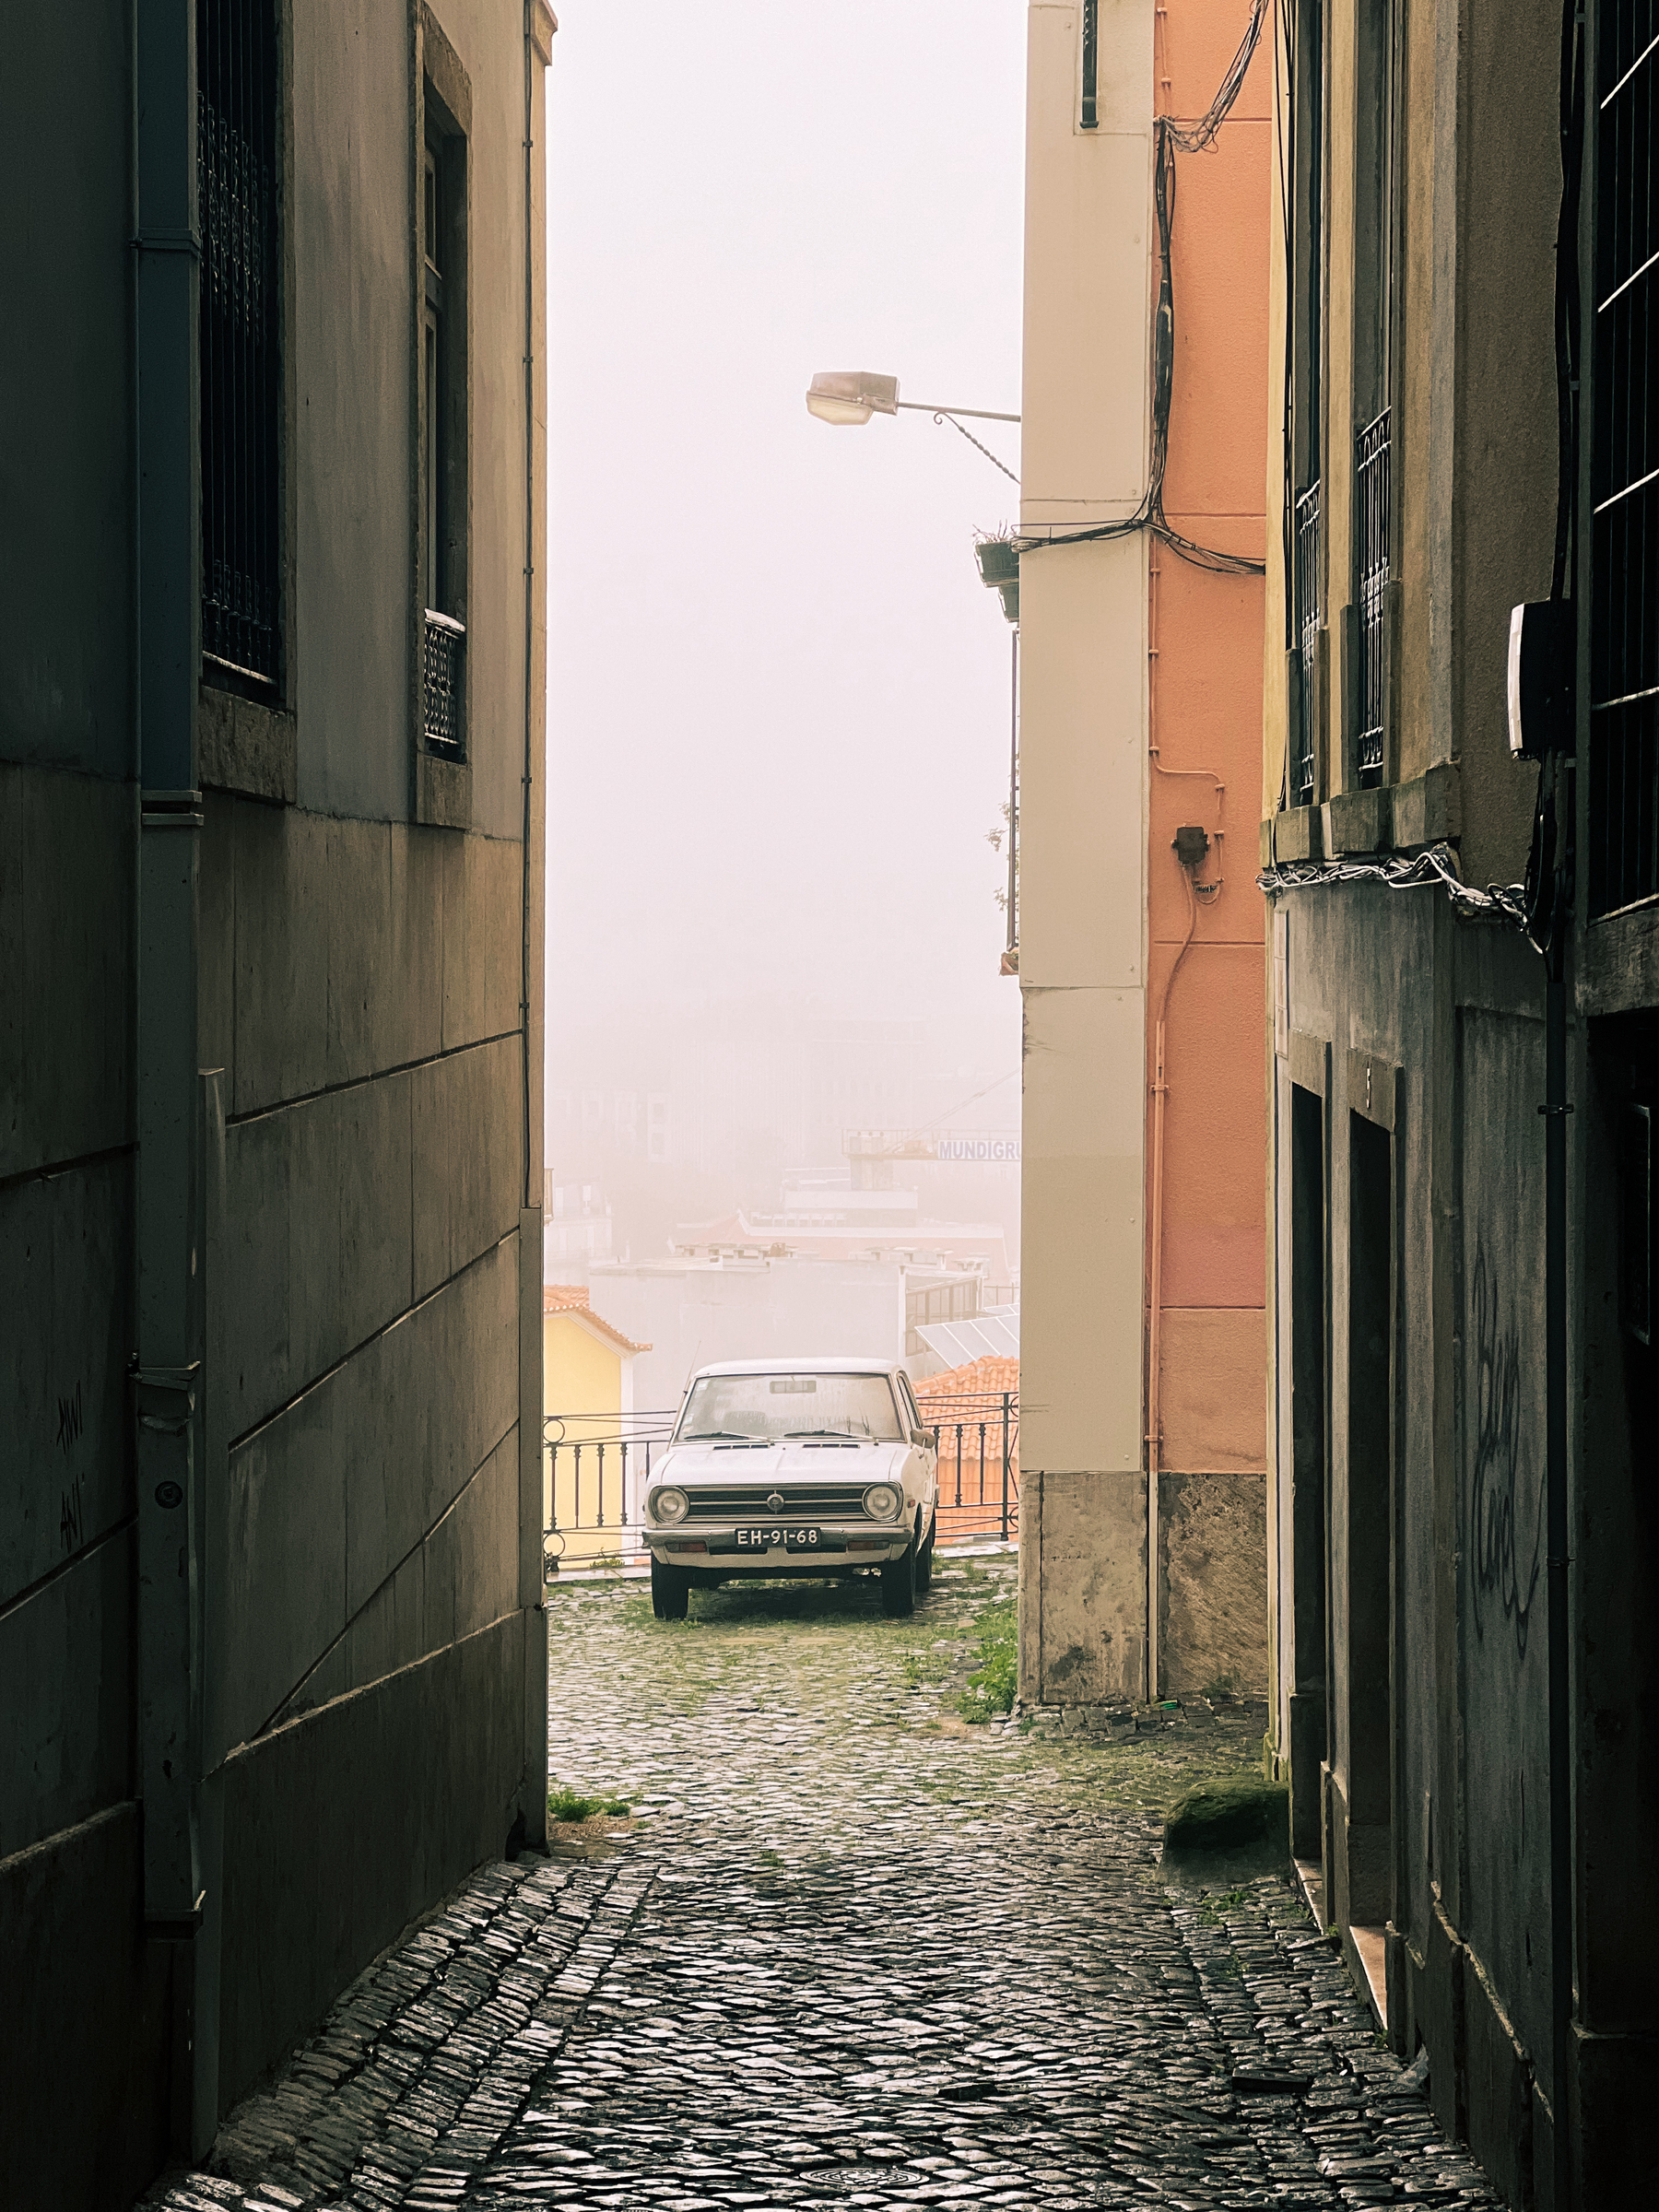 A narrow cobbled street bordered by buildings leads to a classic car parked at the end with buildings partly obscured by fog in the background.